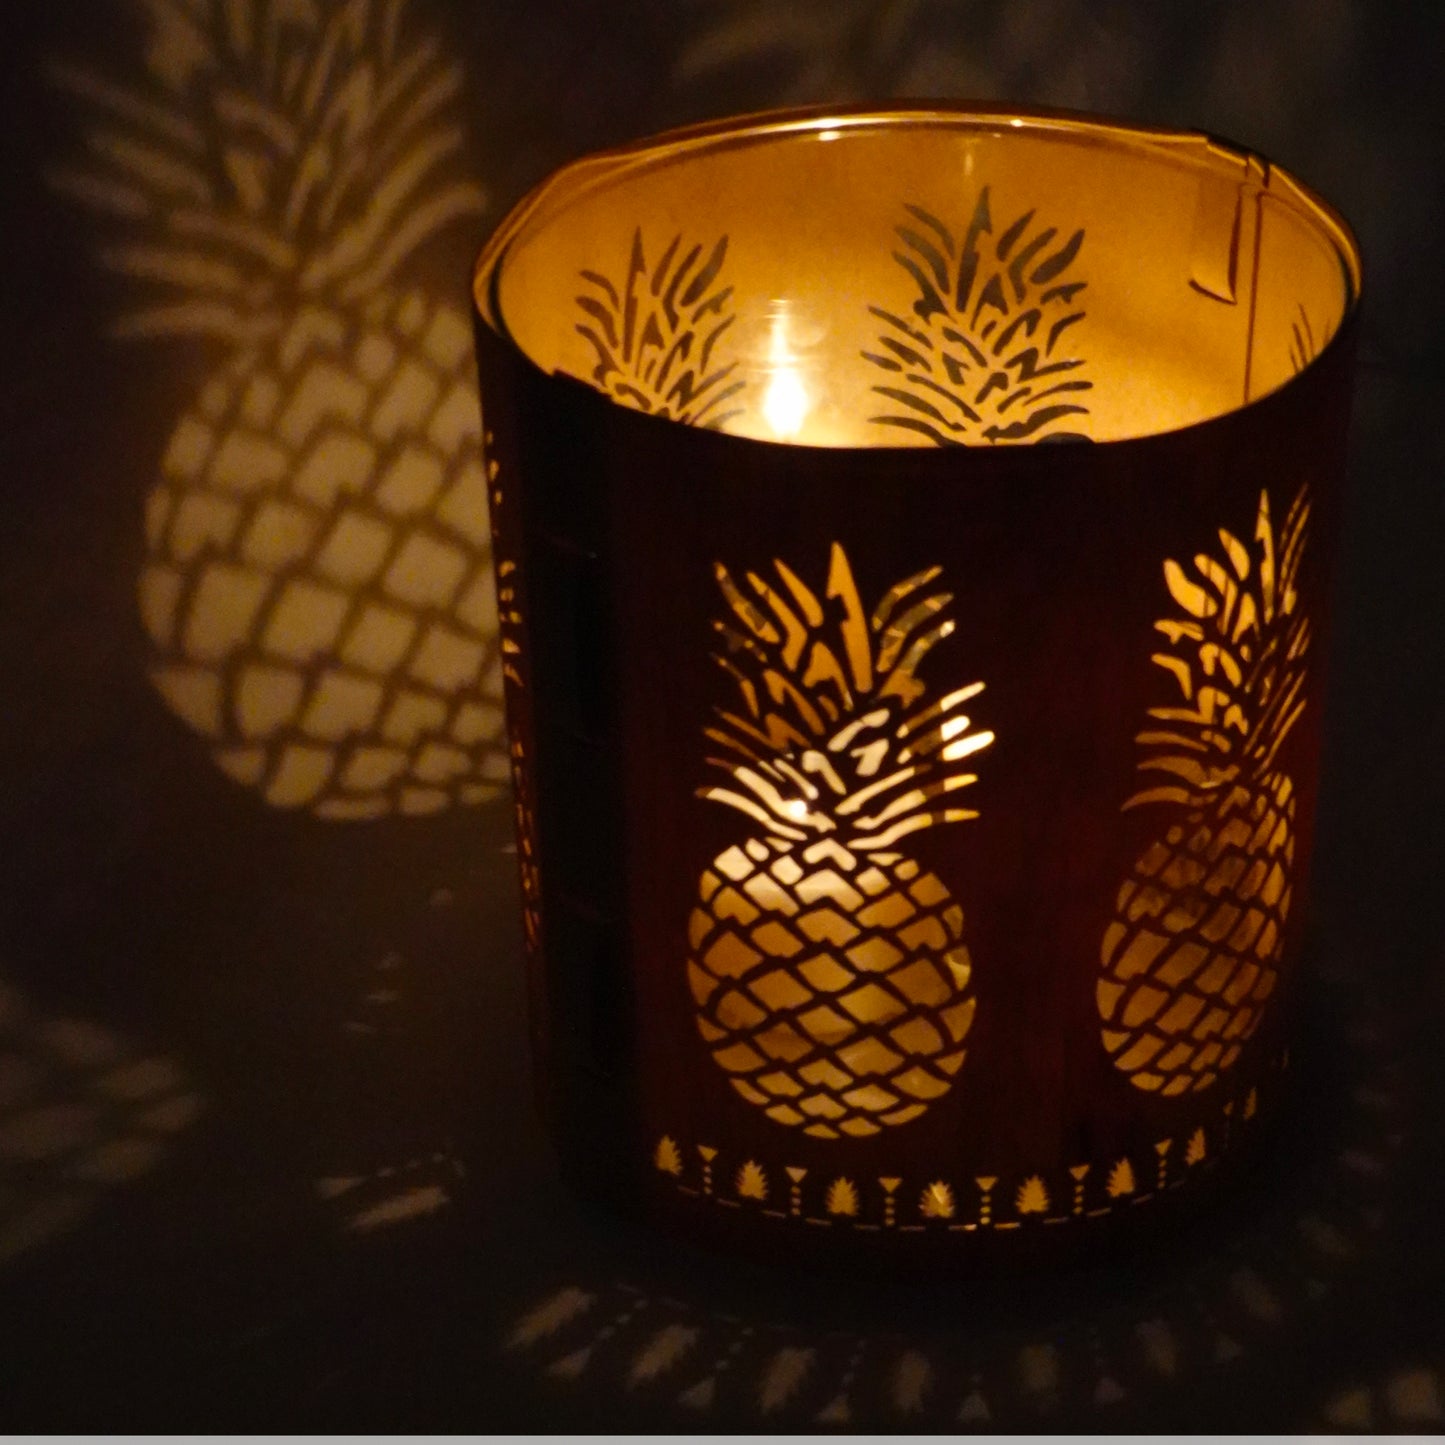 The pineapple lantern - a welcoming tradition in glass and wood-maple,oak,or walnut